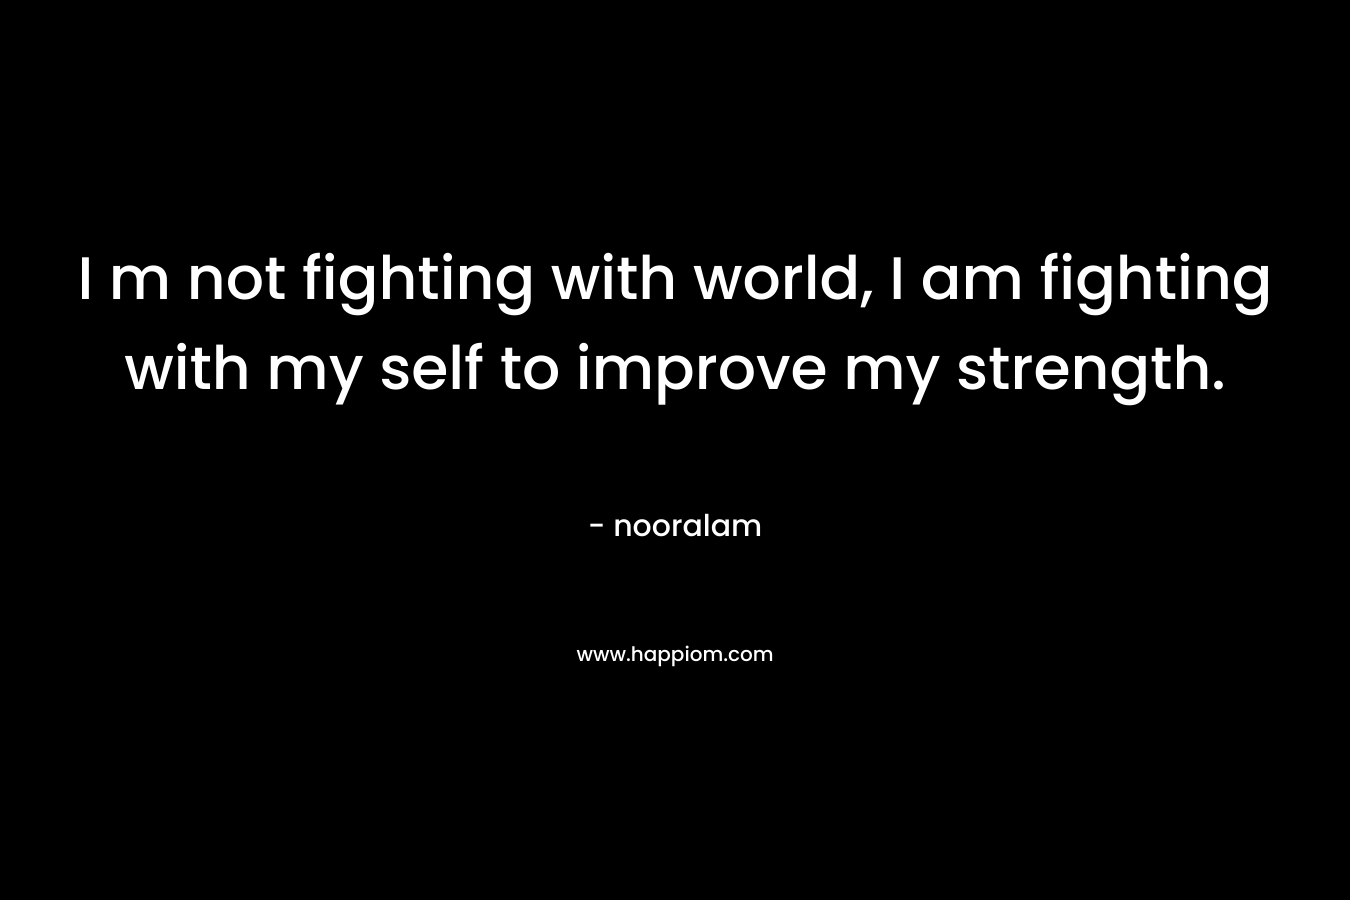 I m not fighting with world, I am fighting with my self to improve my strength. – nooralam